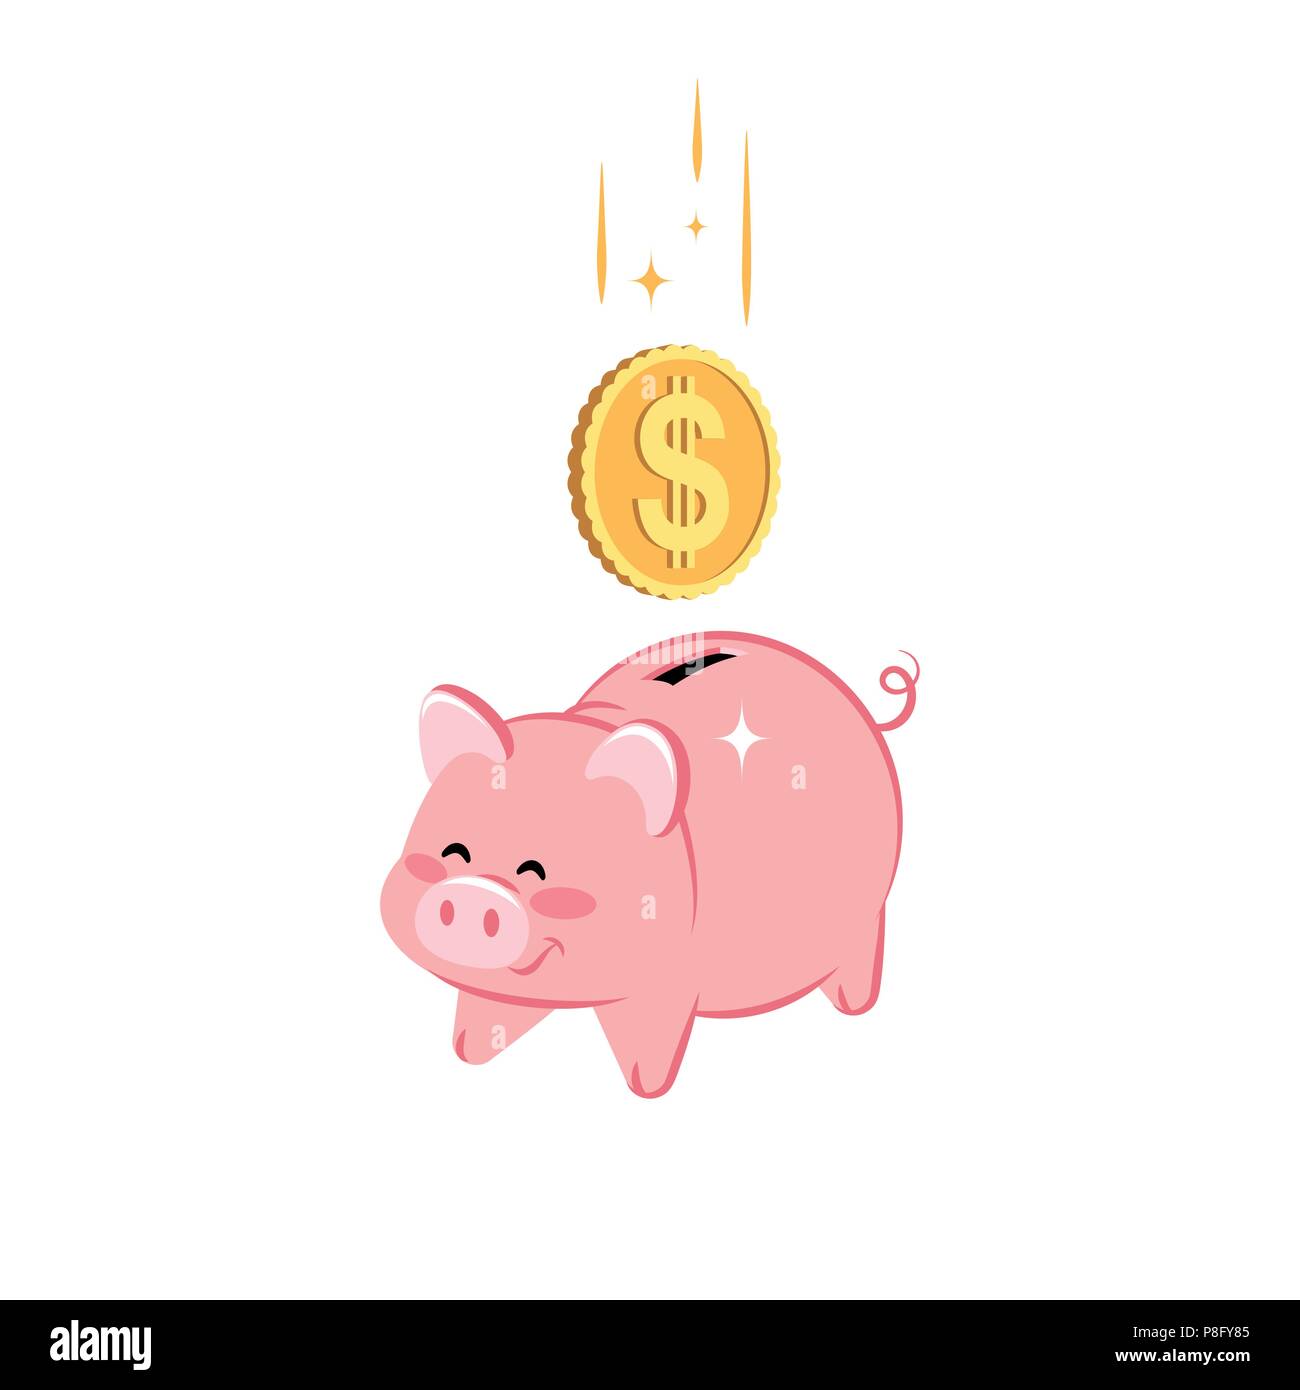 Cute Piggy Bank with falling golden coin of Dollar. Concept of saving money, investment, banking. Flat design. Vector illustration. Stock Vector